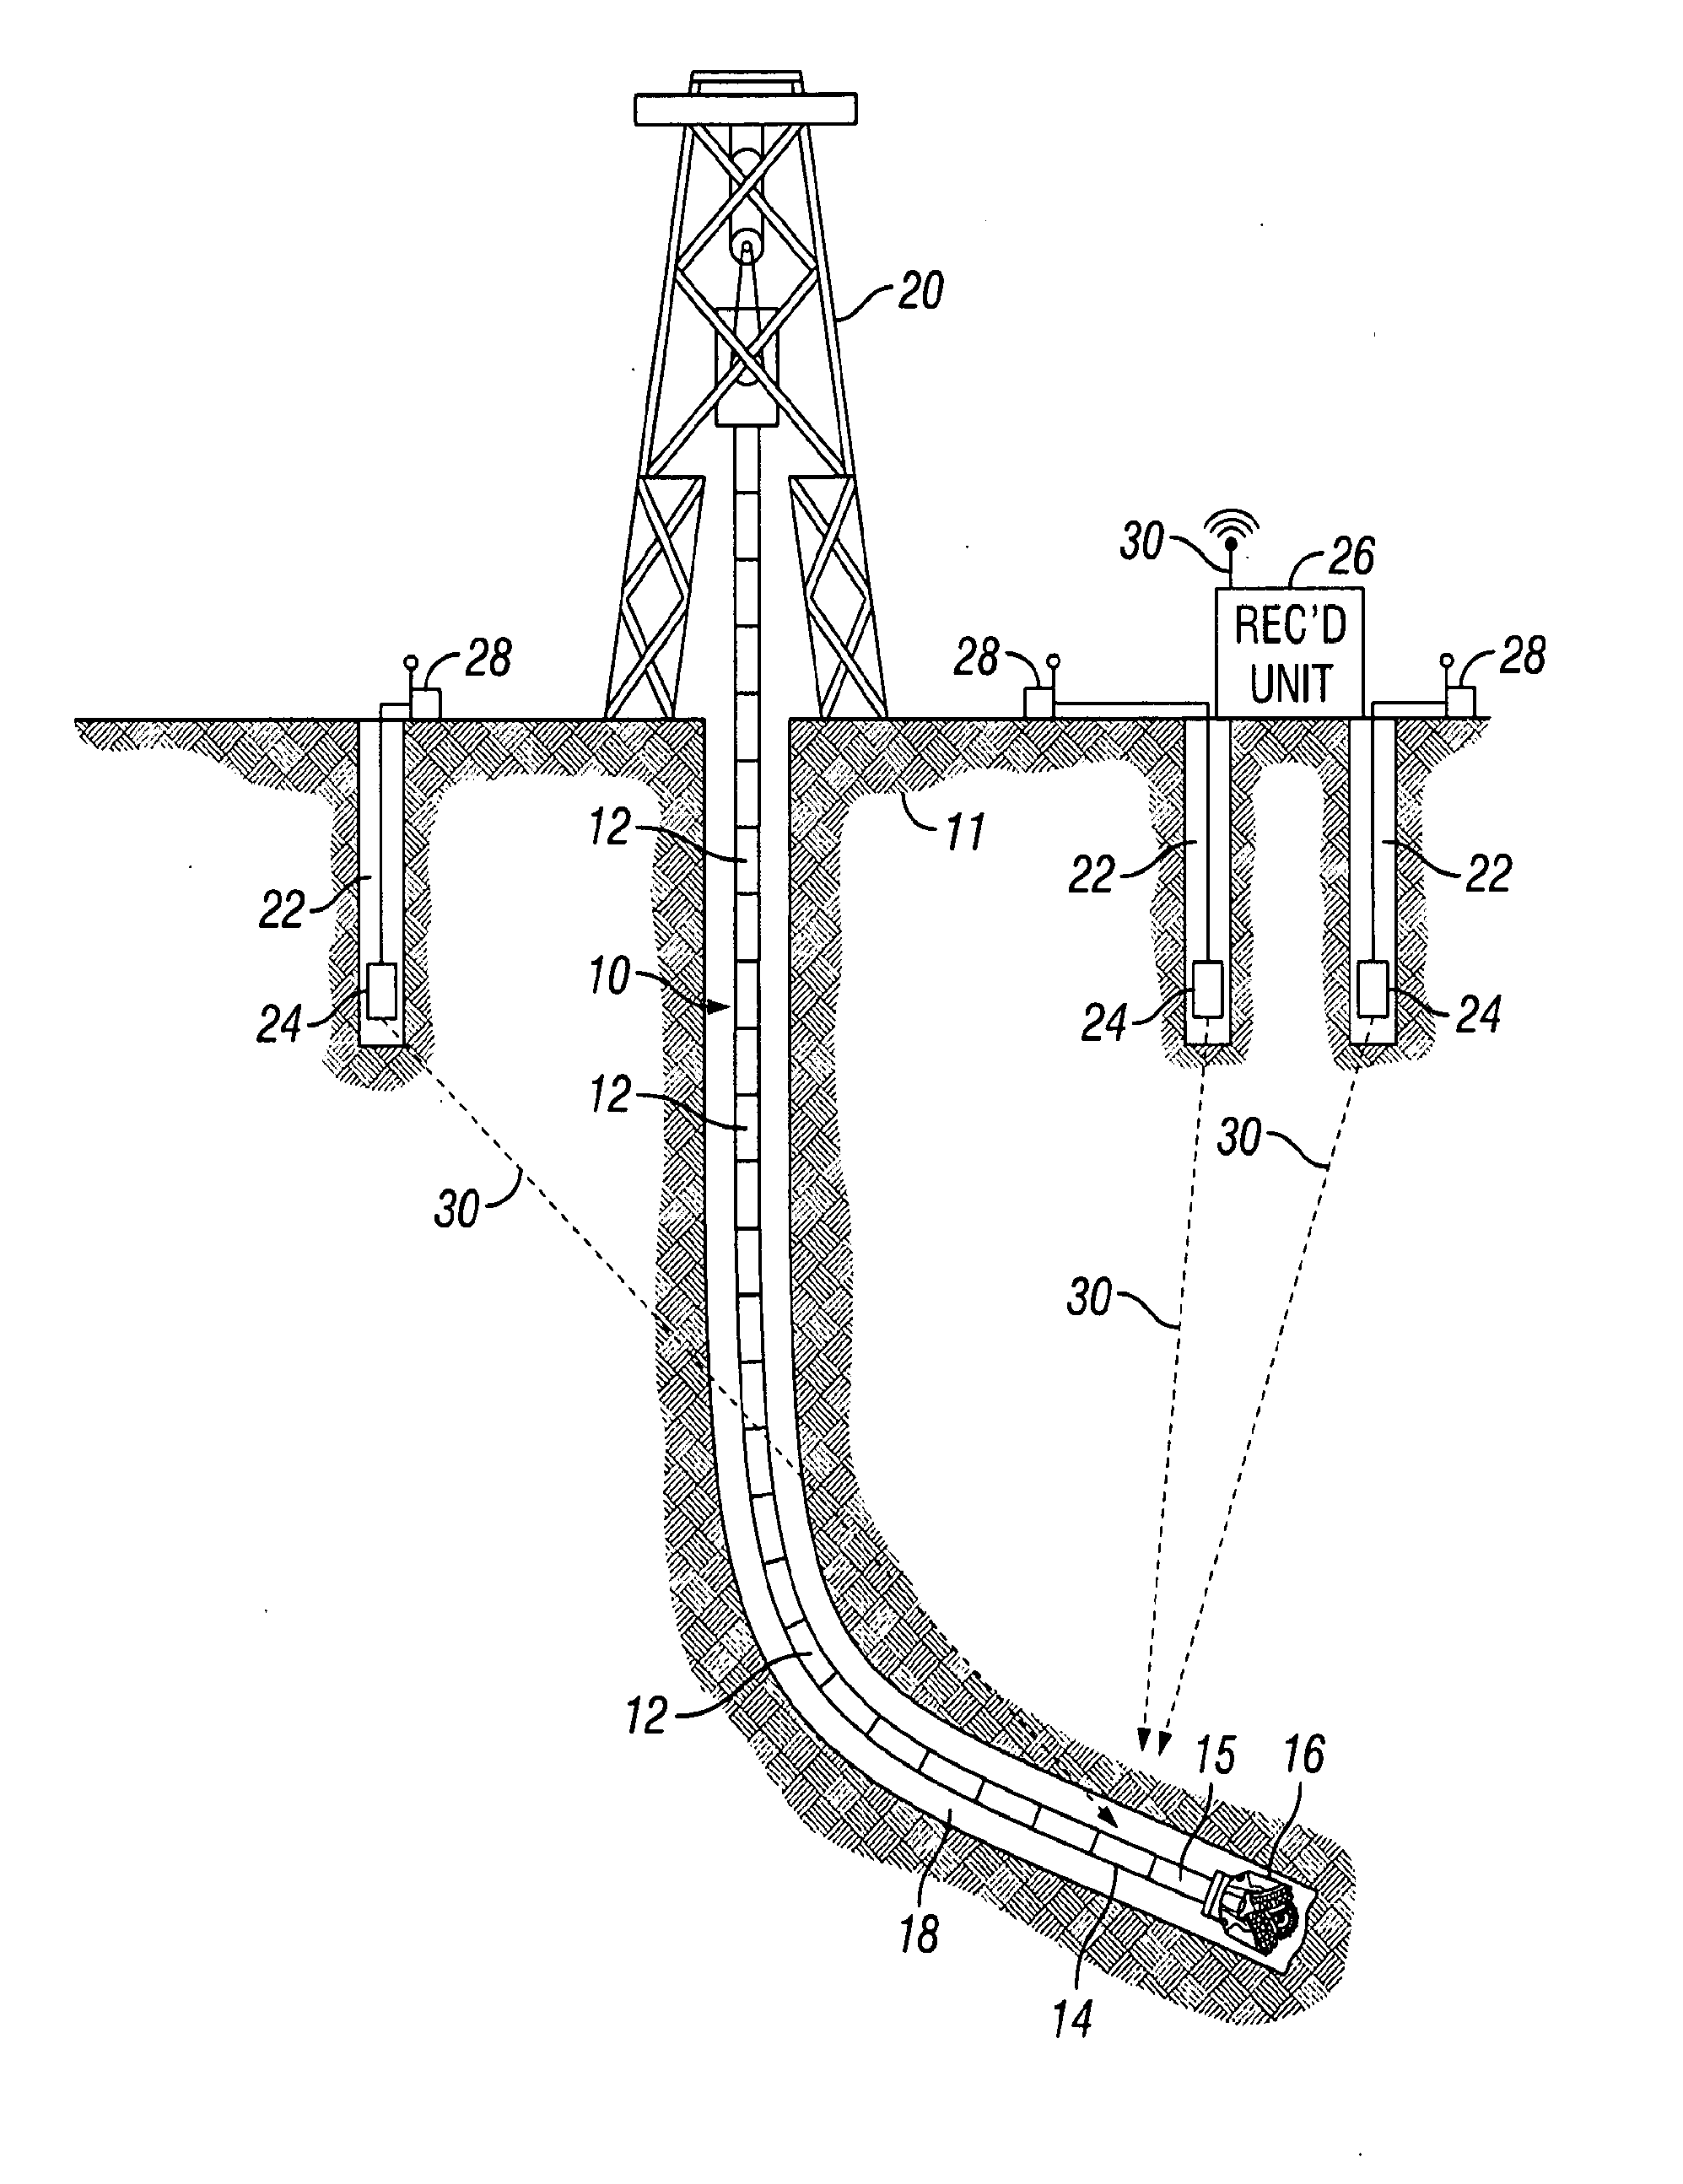 Method for determining wellbore position using seismic sources and seismic receivers